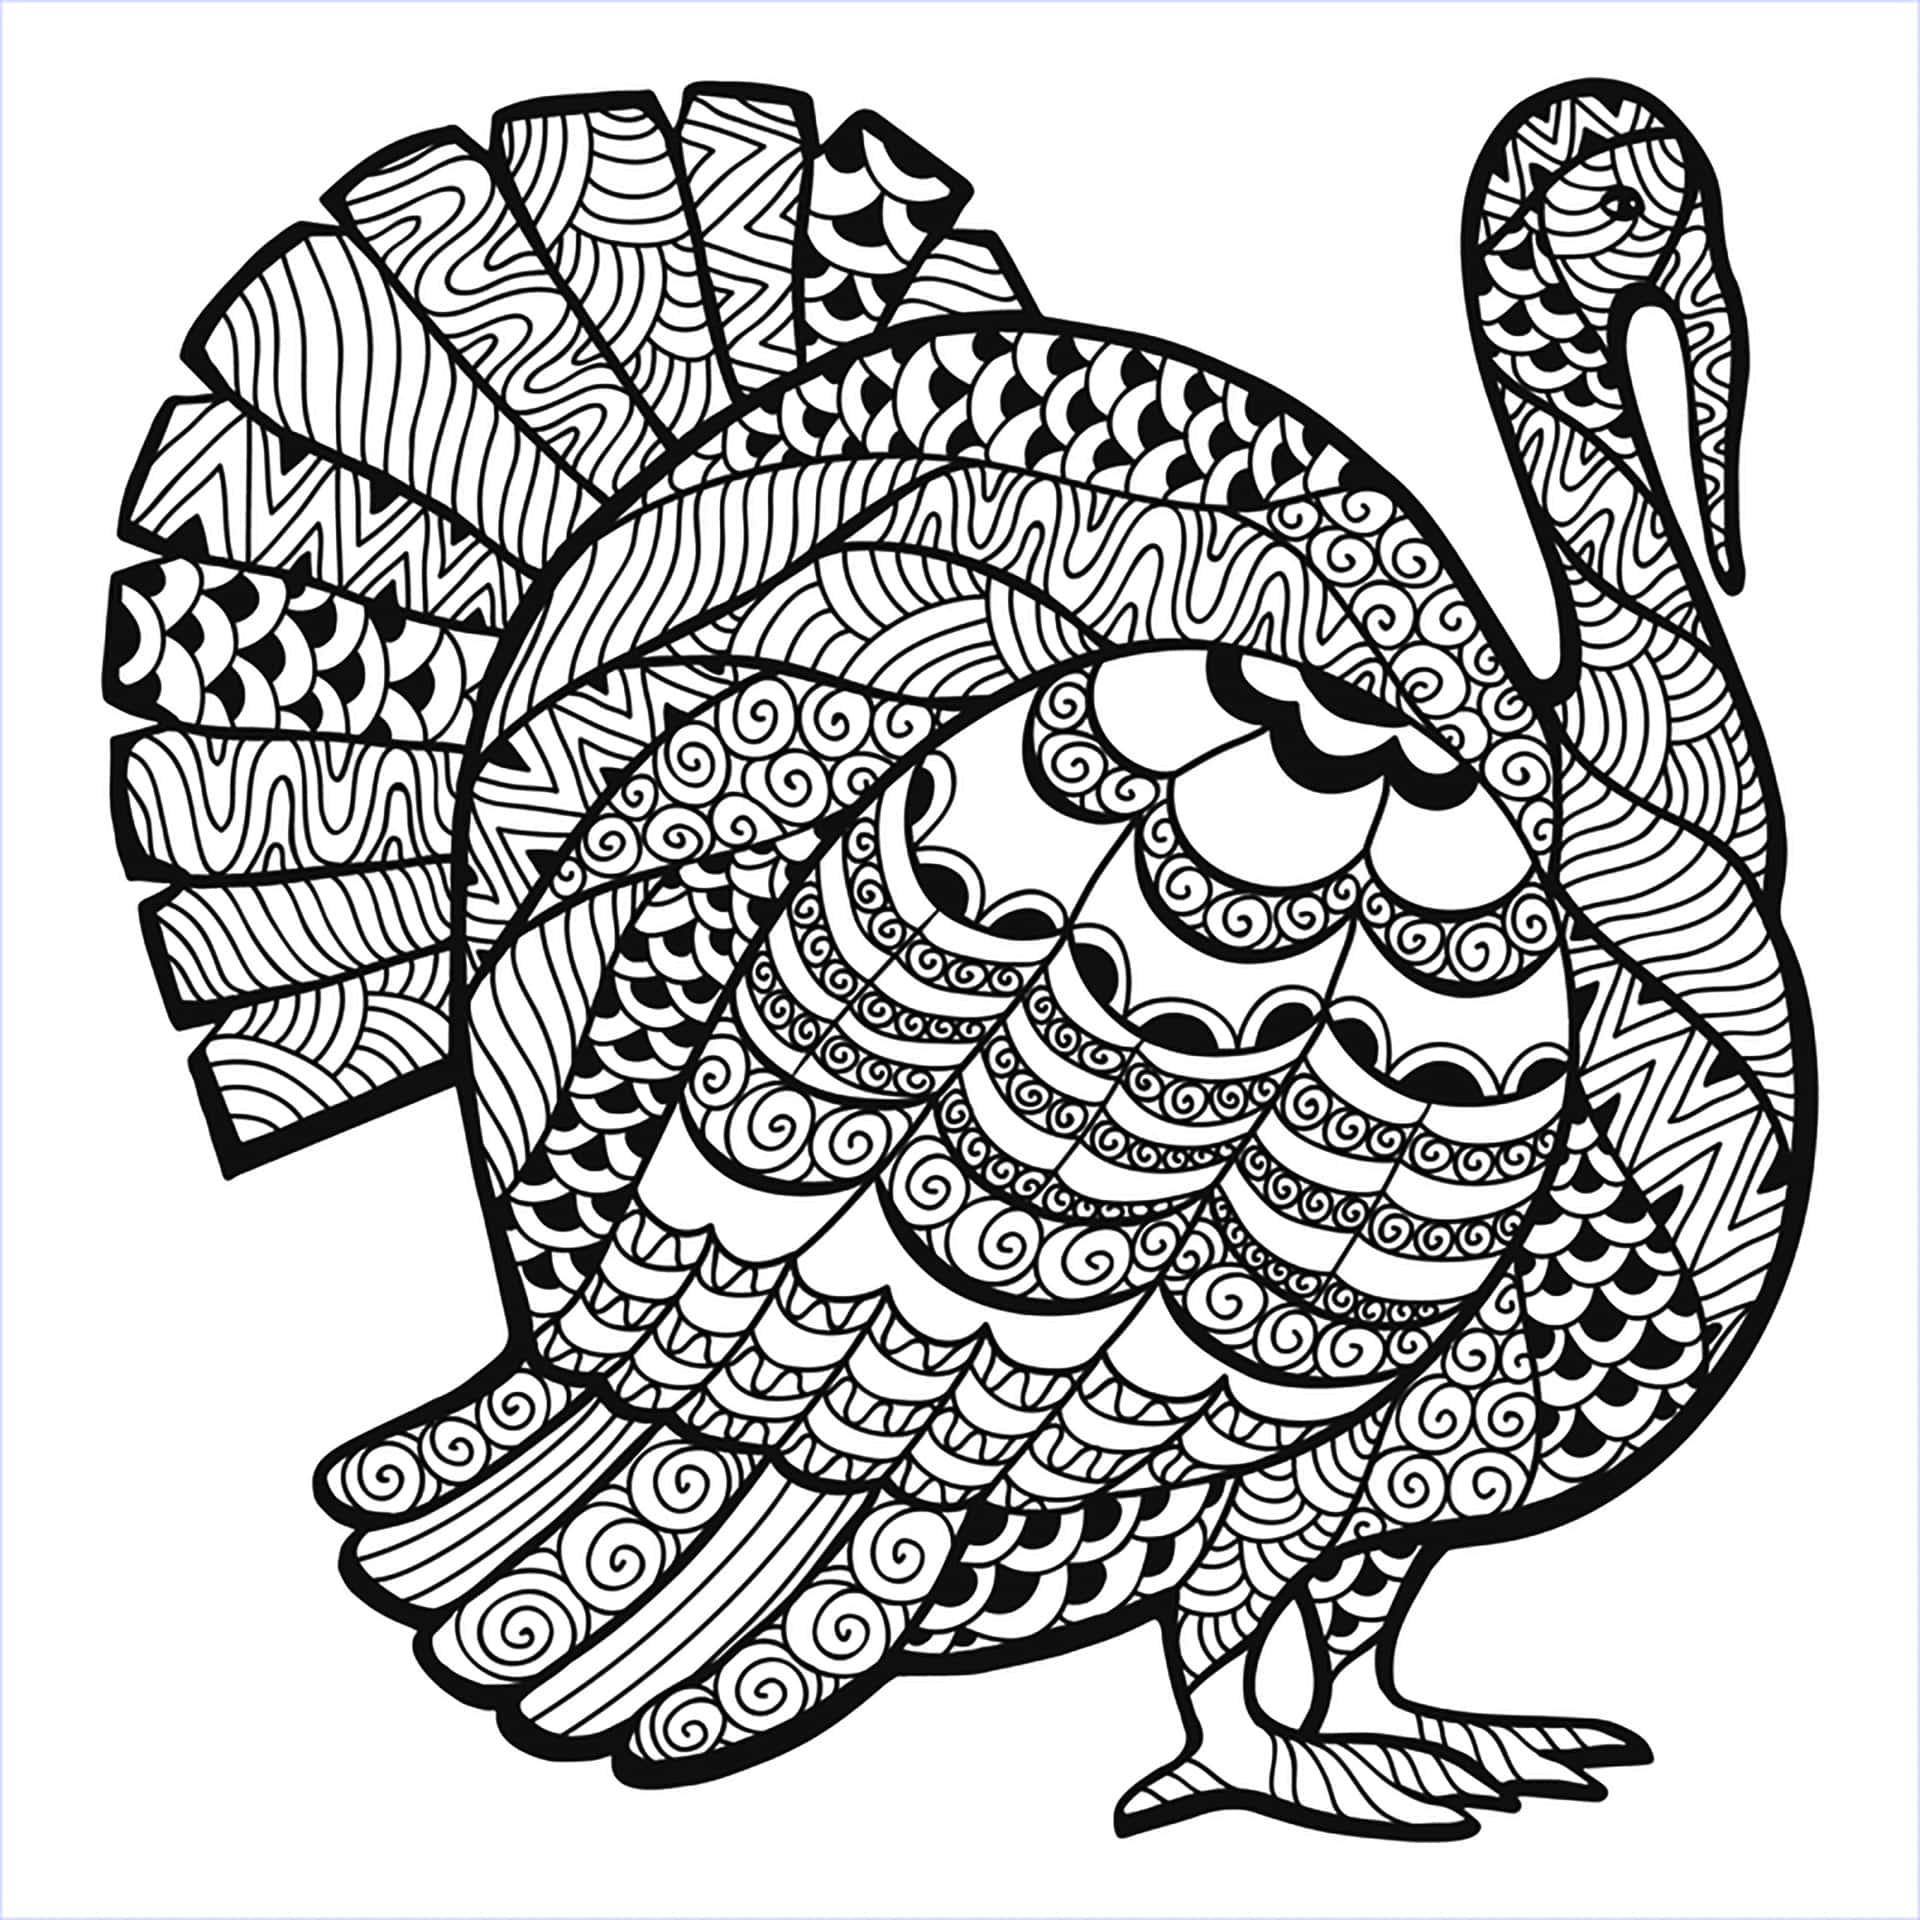 Celebrate Thanksgiving with this fun coloring page.